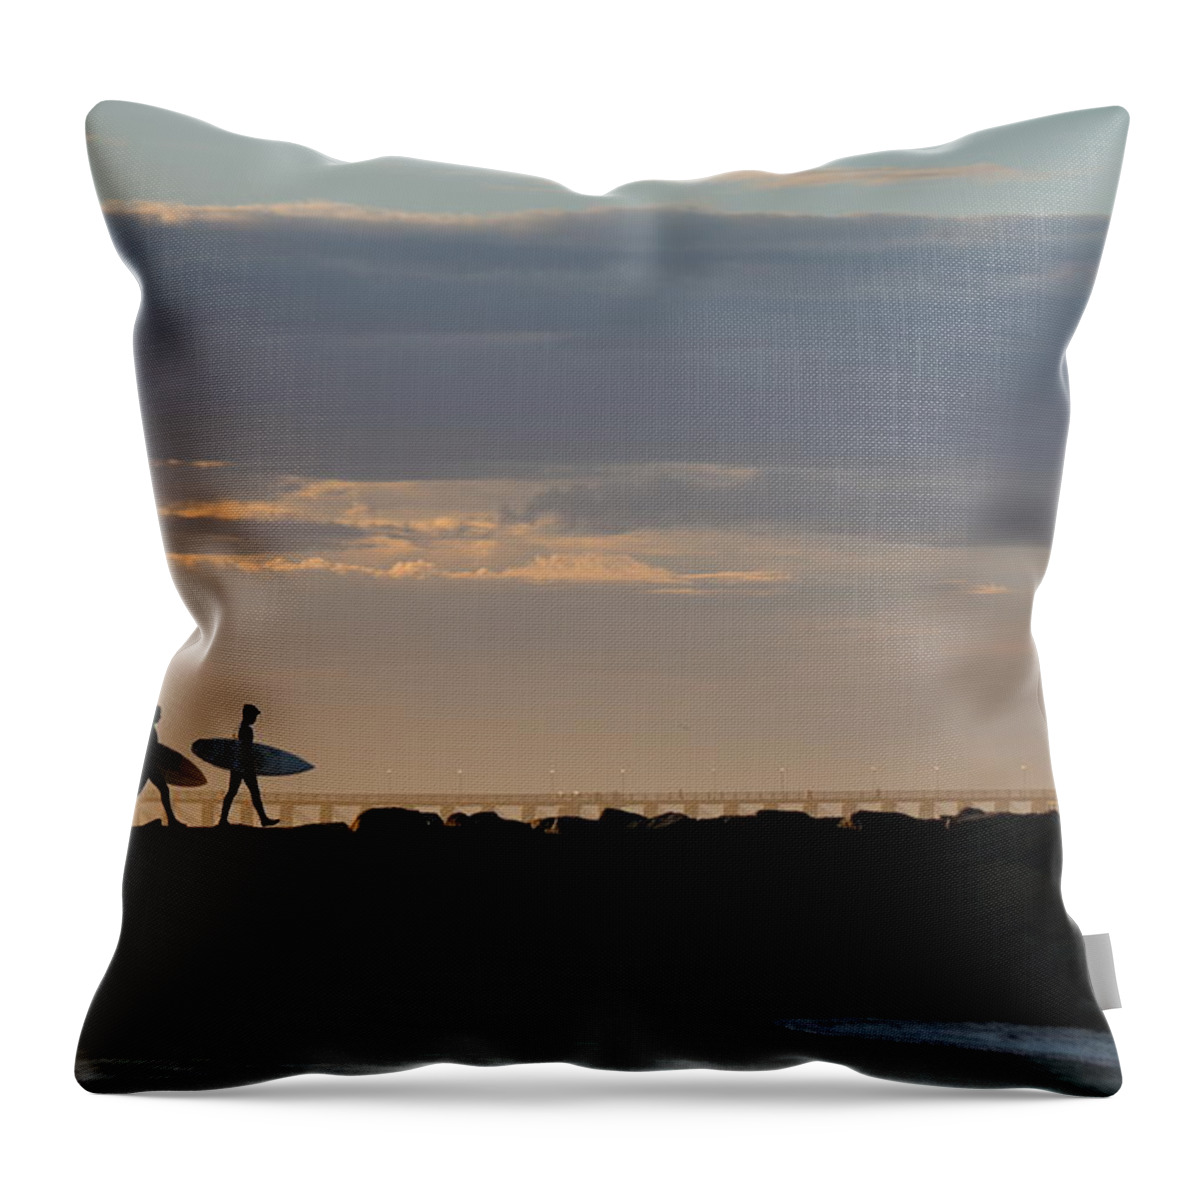 Surf Throw Pillow featuring the photograph Sunrise Surfing by Christy Pooschke